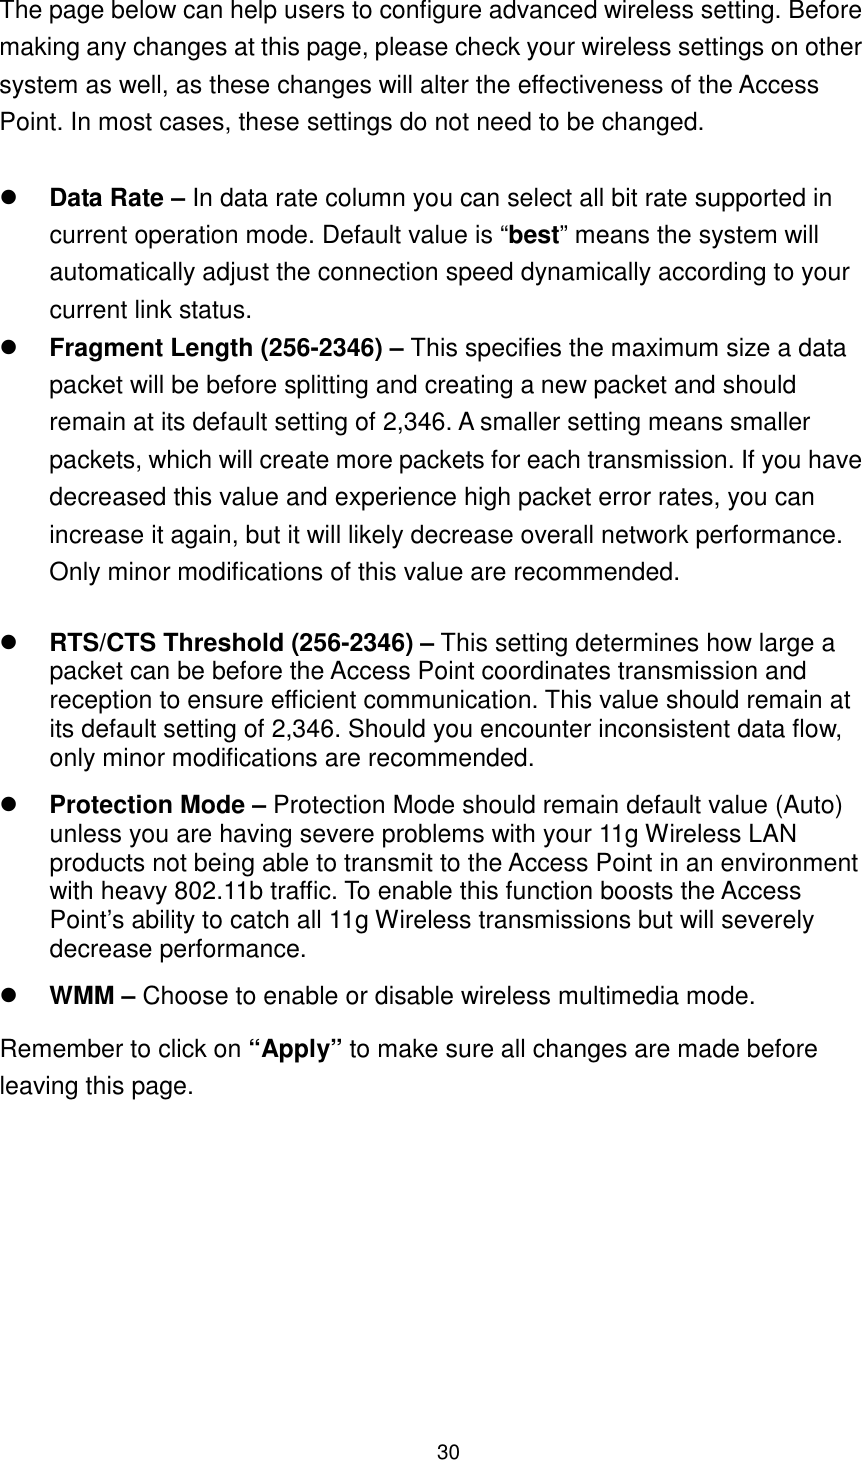  30  The page below can help users to configure advanced wireless setting. Before making any changes at this page, please check your wireless settings on other system as well, as these changes will alter the effectiveness of the Access Point. In most cases, these settings do not need to be changed.     Data Rate – In data rate column you can select all bit rate supported in current operation mode. Default value is “best” means the system will automatically adjust the connection speed dynamically according to your current link status.    Fragment Length (256-2346) – This specifies the maximum size a data packet will be before splitting and creating a new packet and should remain at its default setting of 2,346. A smaller setting means smaller packets, which will create more packets for each transmission. If you have decreased this value and experience high packet error rates, you can increase it again, but it will likely decrease overall network performance. Only minor modifications of this value are recommended.   RTS/CTS Threshold (256-2346) – This setting determines how large a packet can be before the Access Point coordinates transmission and reception to ensure efficient communication. This value should remain at its default setting of 2,346. Should you encounter inconsistent data flow, only minor modifications are recommended.  Protection Mode – Protection Mode should remain default value (Auto) unless you are having severe problems with your 11g Wireless LAN products not being able to transmit to the Access Point in an environment with heavy 802.11b traffic. To enable this function boosts the Access Point’s ability to catch all 11g Wireless transmissions but will severely decrease performance.    WMM – Choose to enable or disable wireless multimedia mode. Remember to click on “Apply” to make sure all changes are made before leaving this page.    